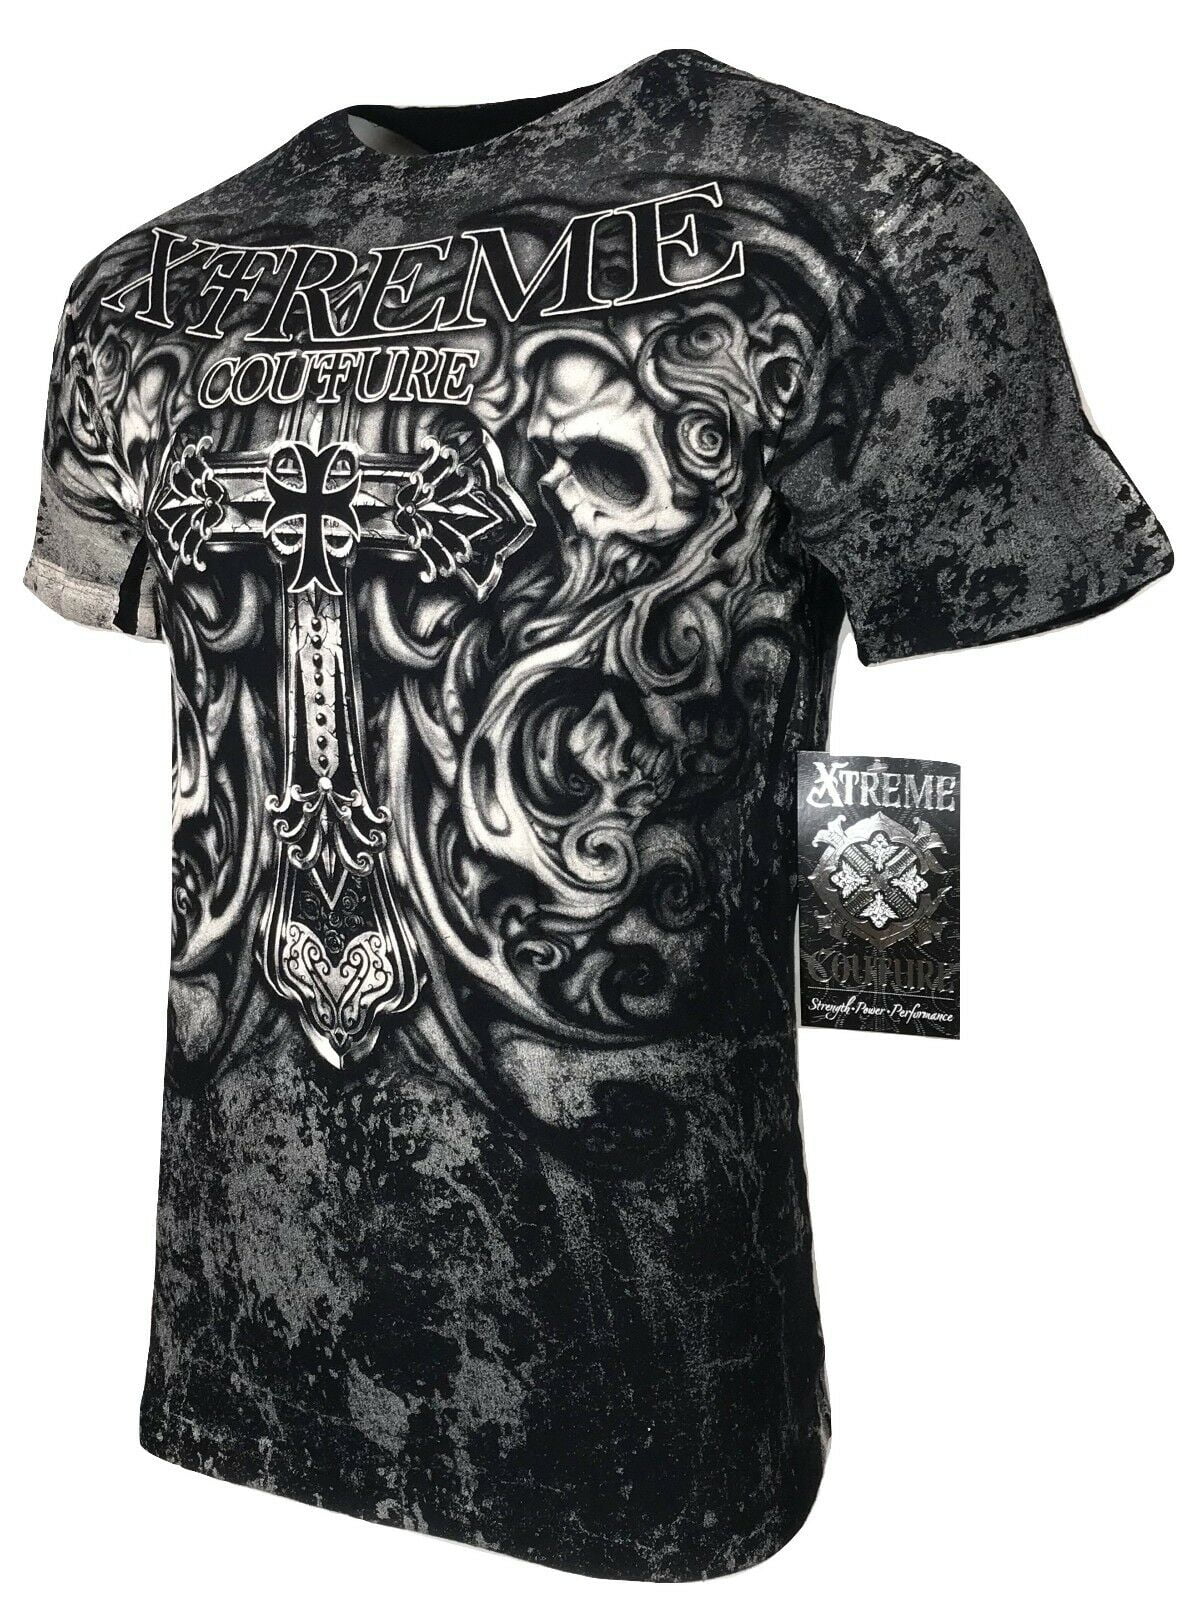 XTREME COUTURE by AFFLICTION Men T-Shirt HADES Skulls Biker MMA GYM S ...